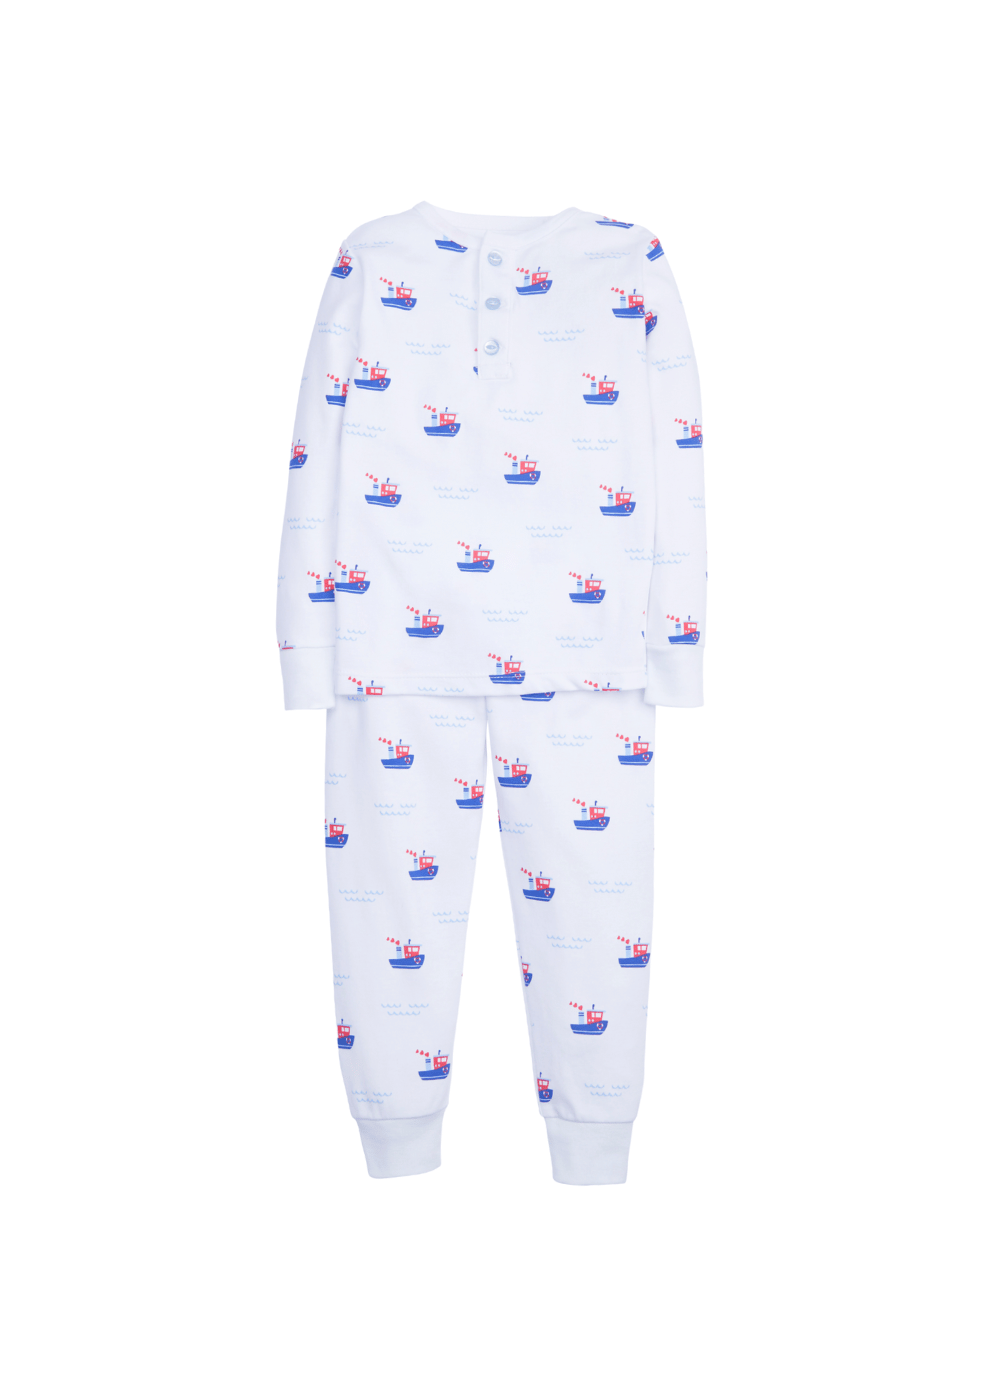 seguridadindustrialcr boys printed jammies with tugboat heart design for valentine's day